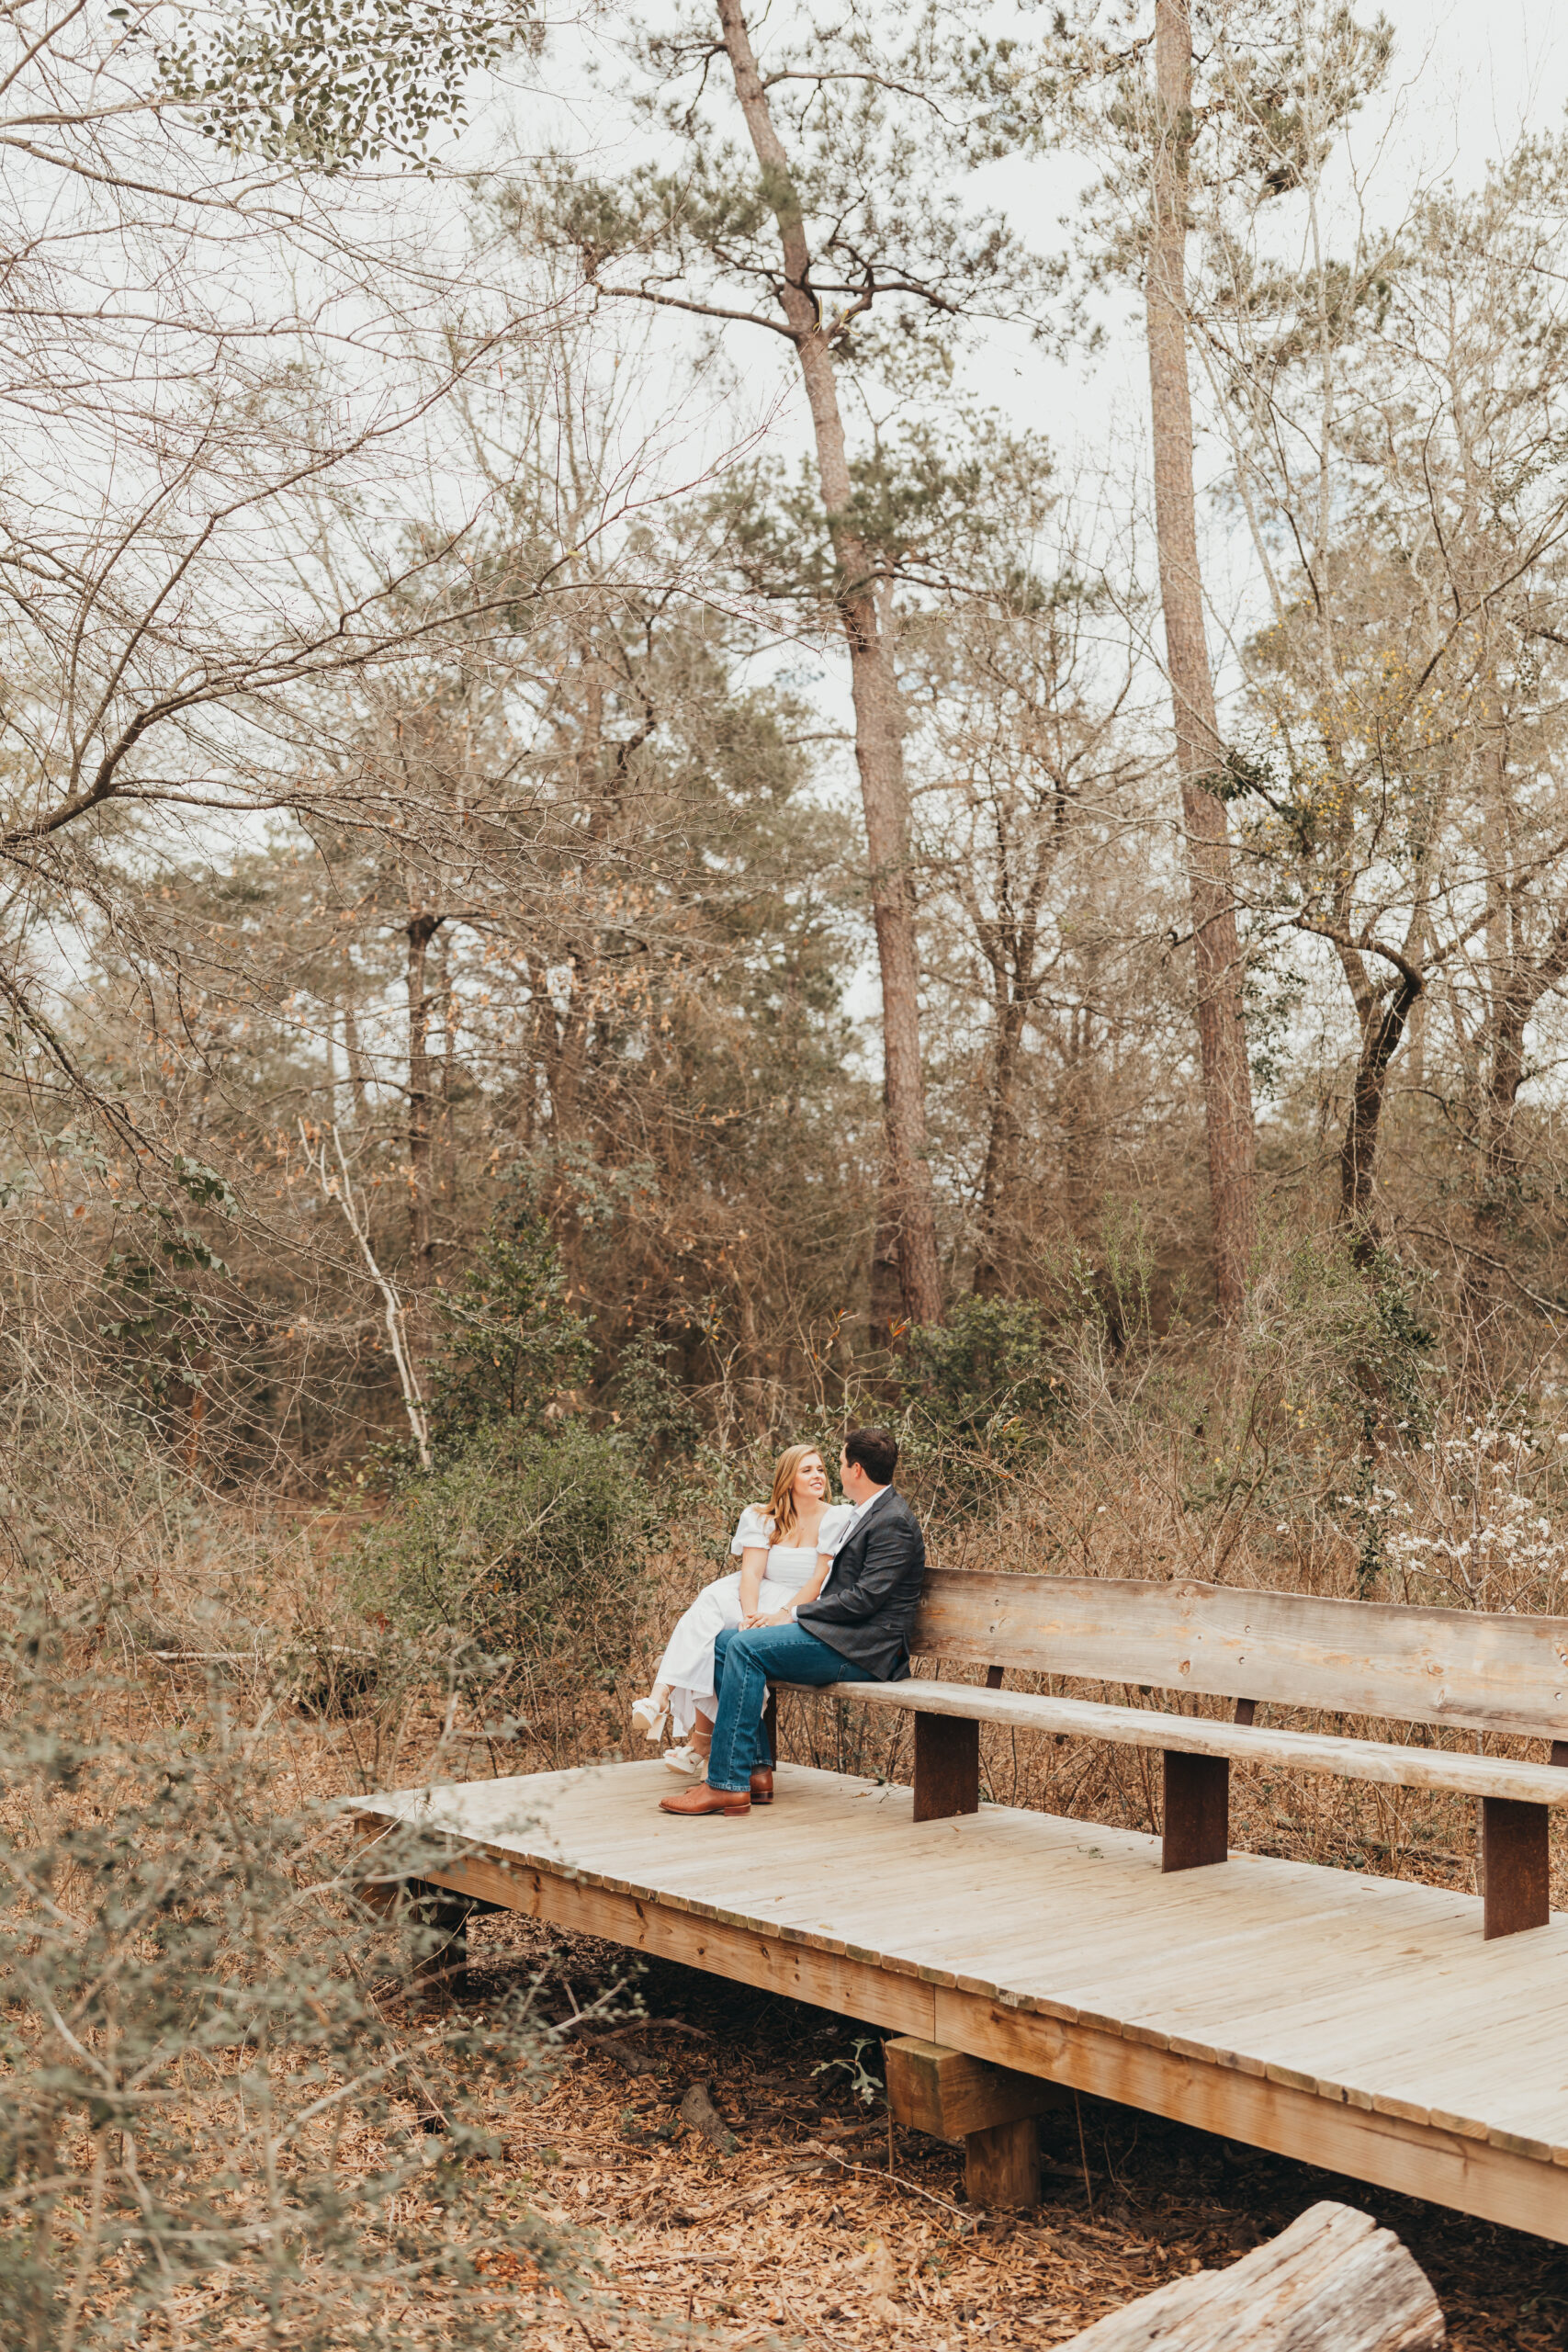 Katherine and Paul celebrate their engagement with outdoor garden session.